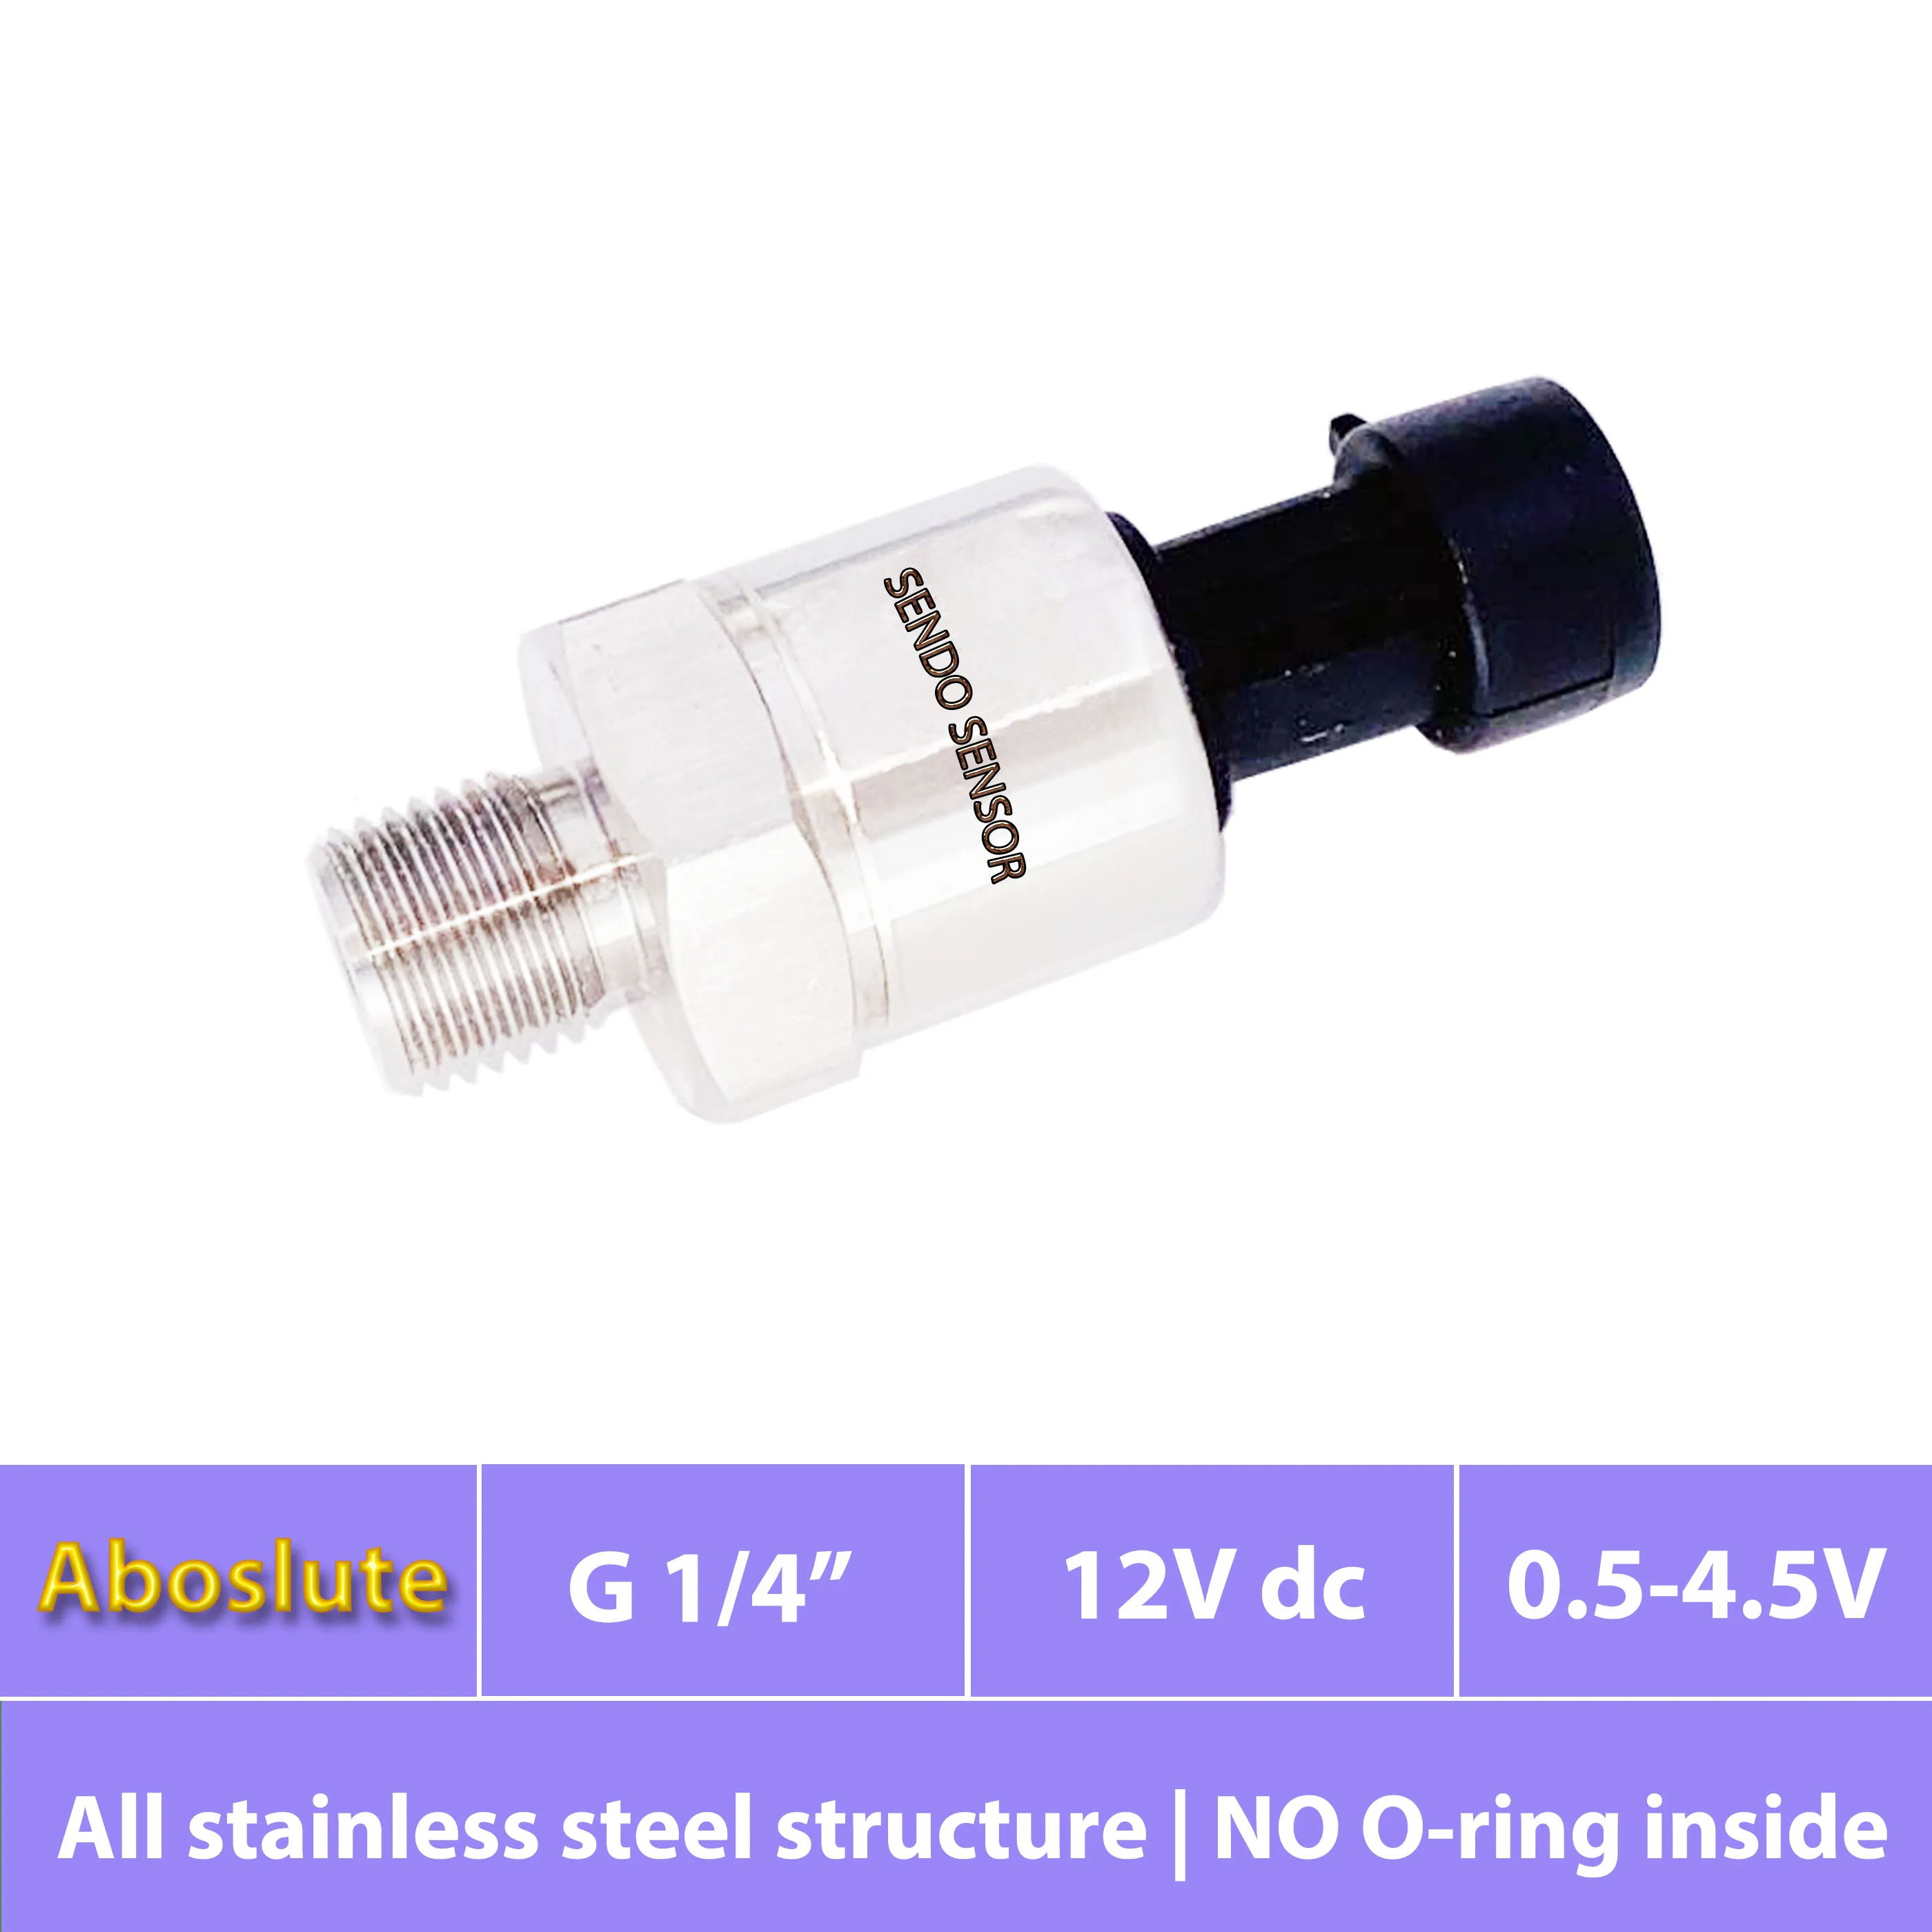 Absolute pressure sensor for gases & media in refrigeration, ammonia, 0.1 to 10 mpa abs, 15 to 1500 psia, 0.5 4.5V, G 1 4 thread